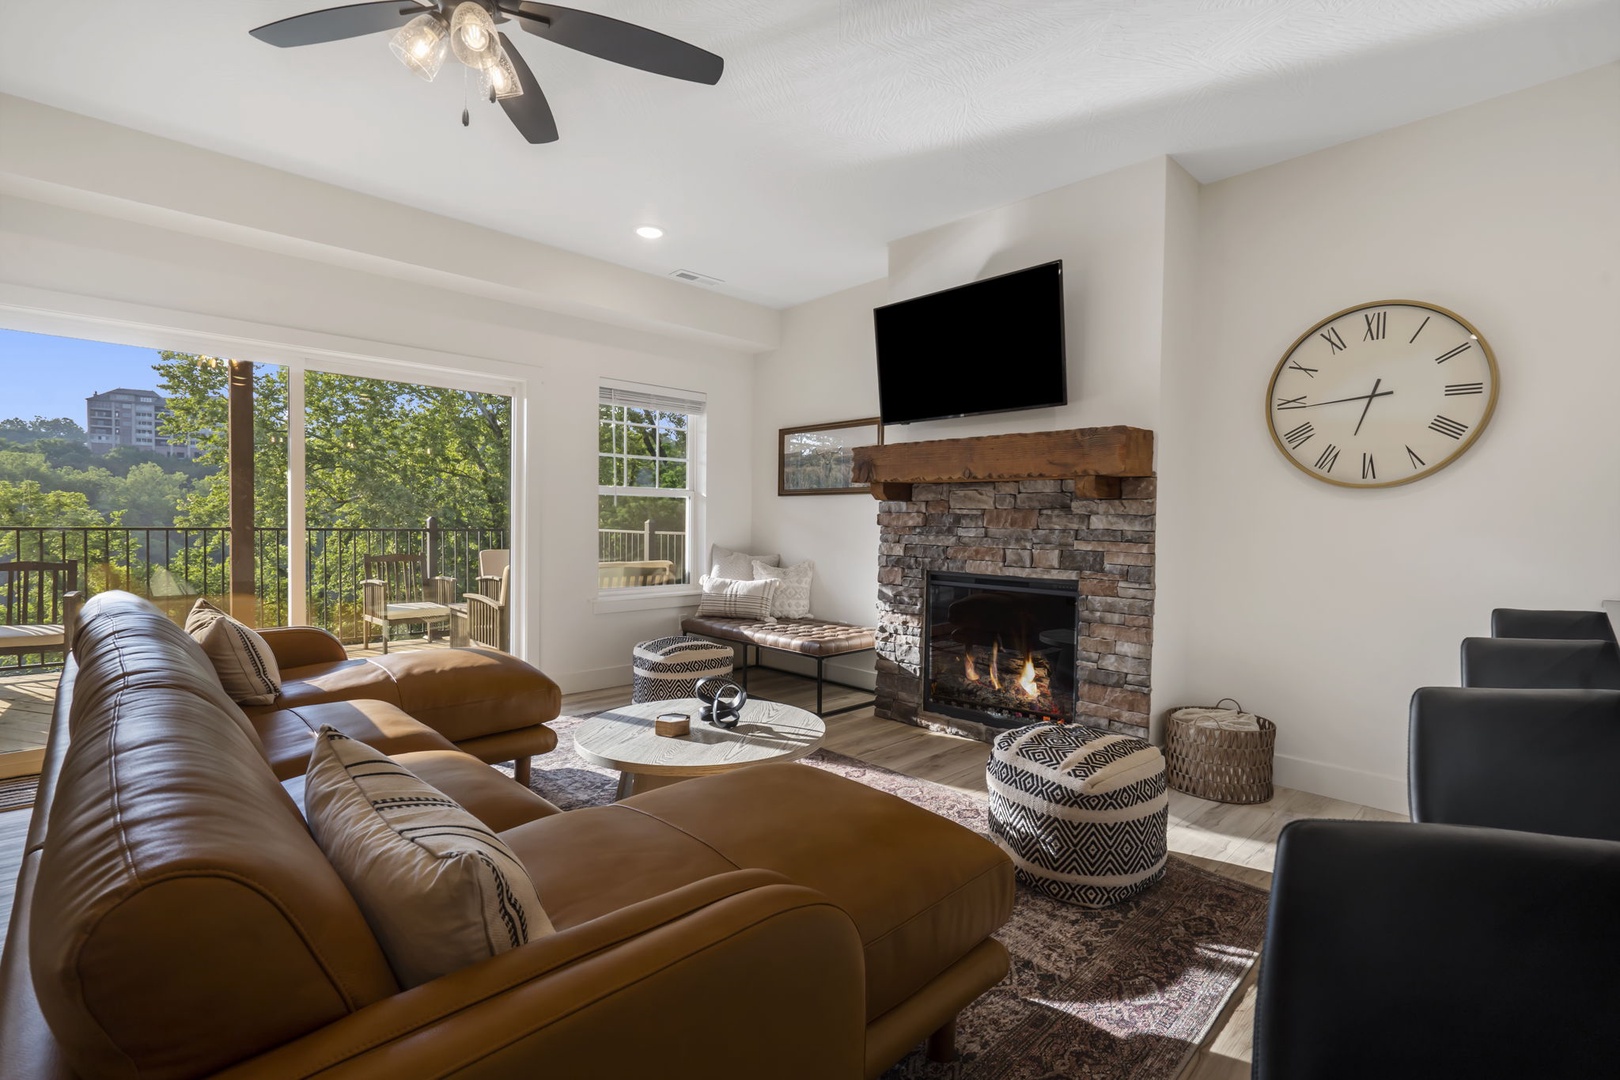 Curl up for a movie by the fireplace or to enjoy the amazing view in comfort